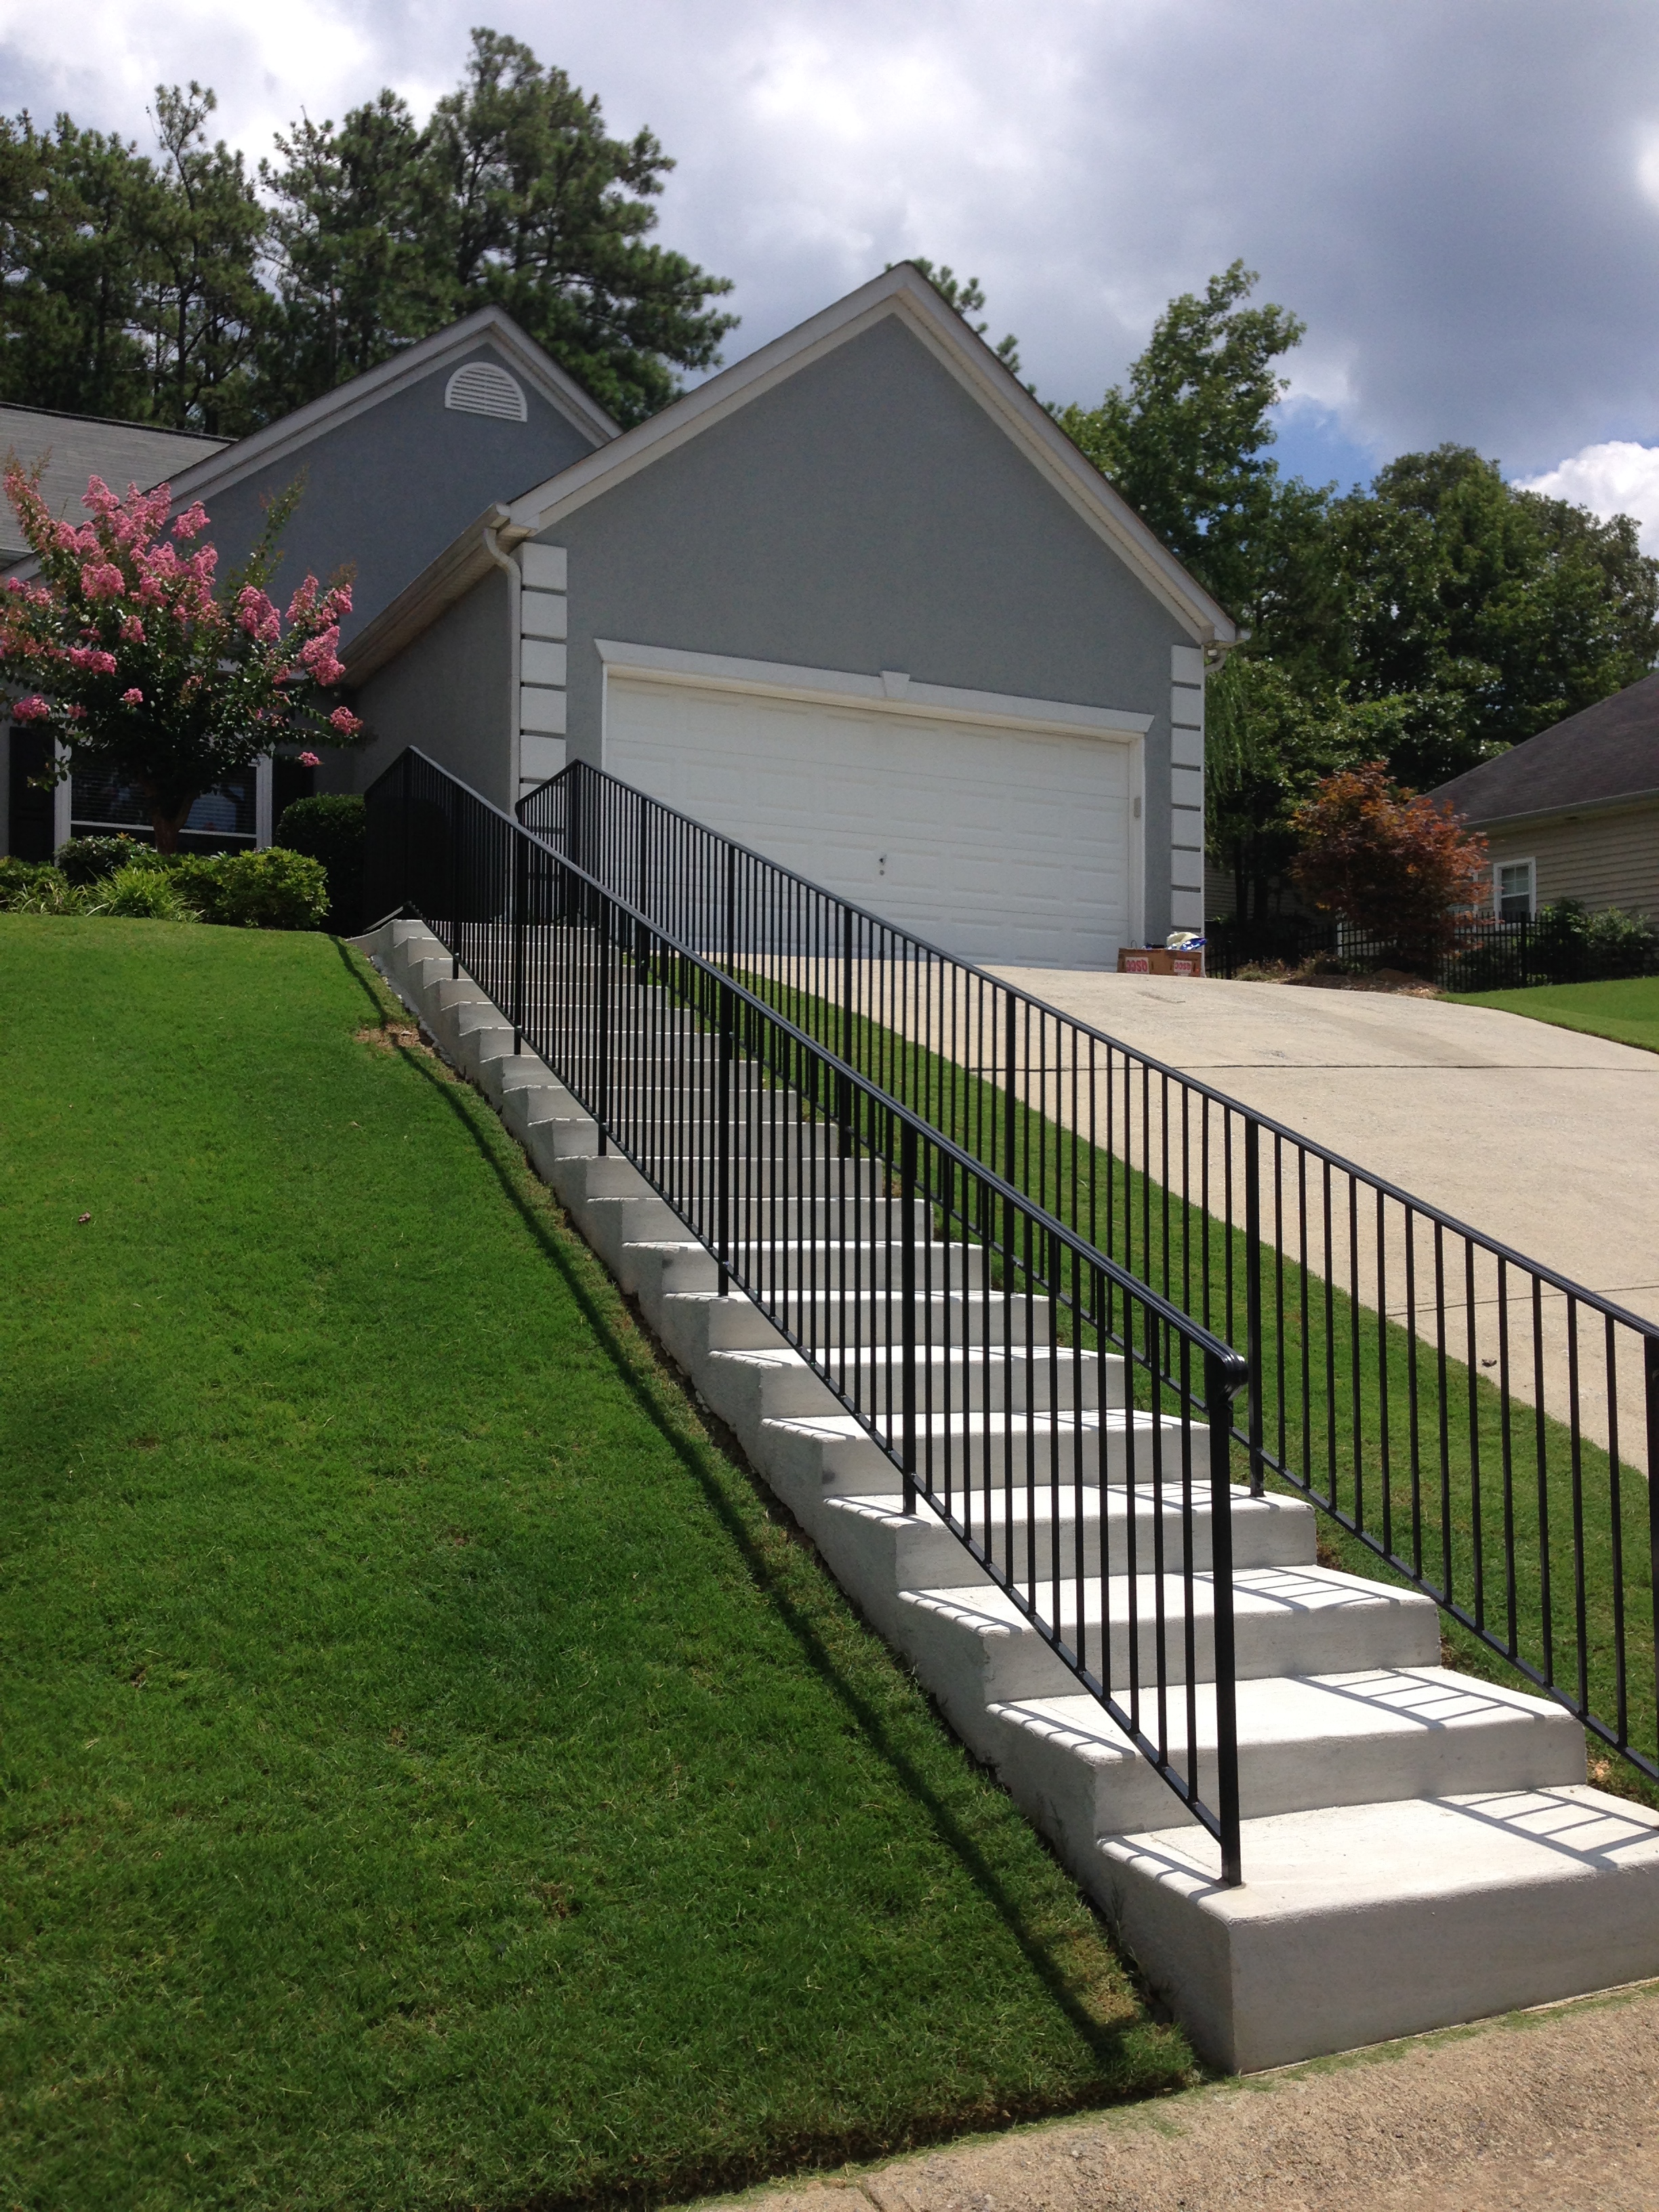 Newly constructed concrete stairs outside a home.